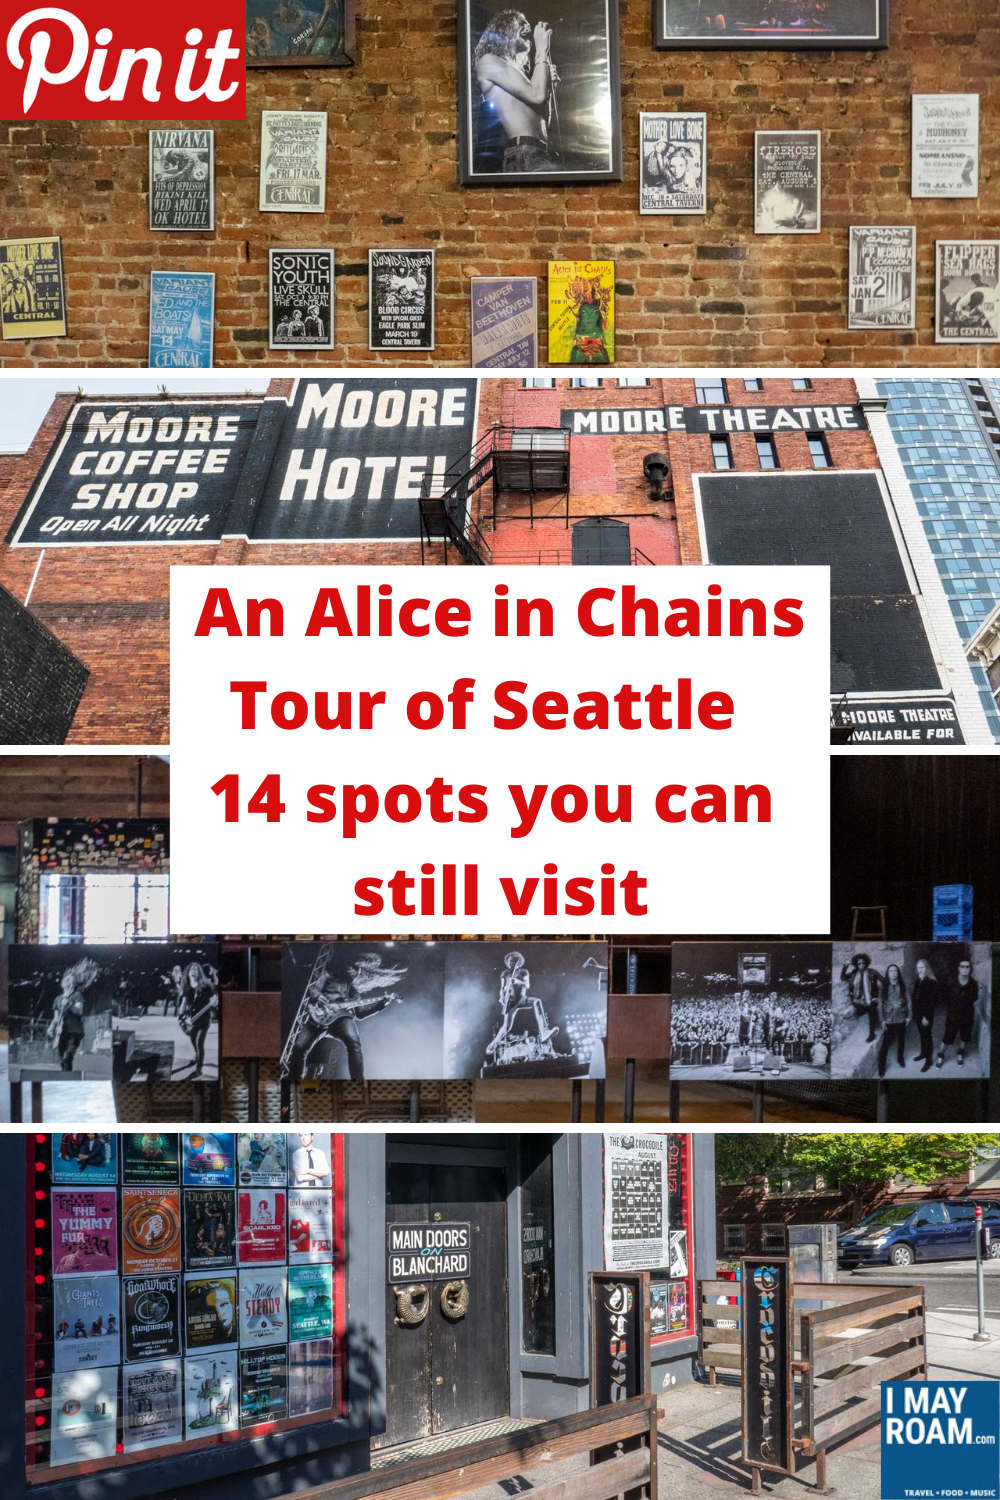 Pinterest An Alice in Chains Tour of Seattle 14 spots you can still visit